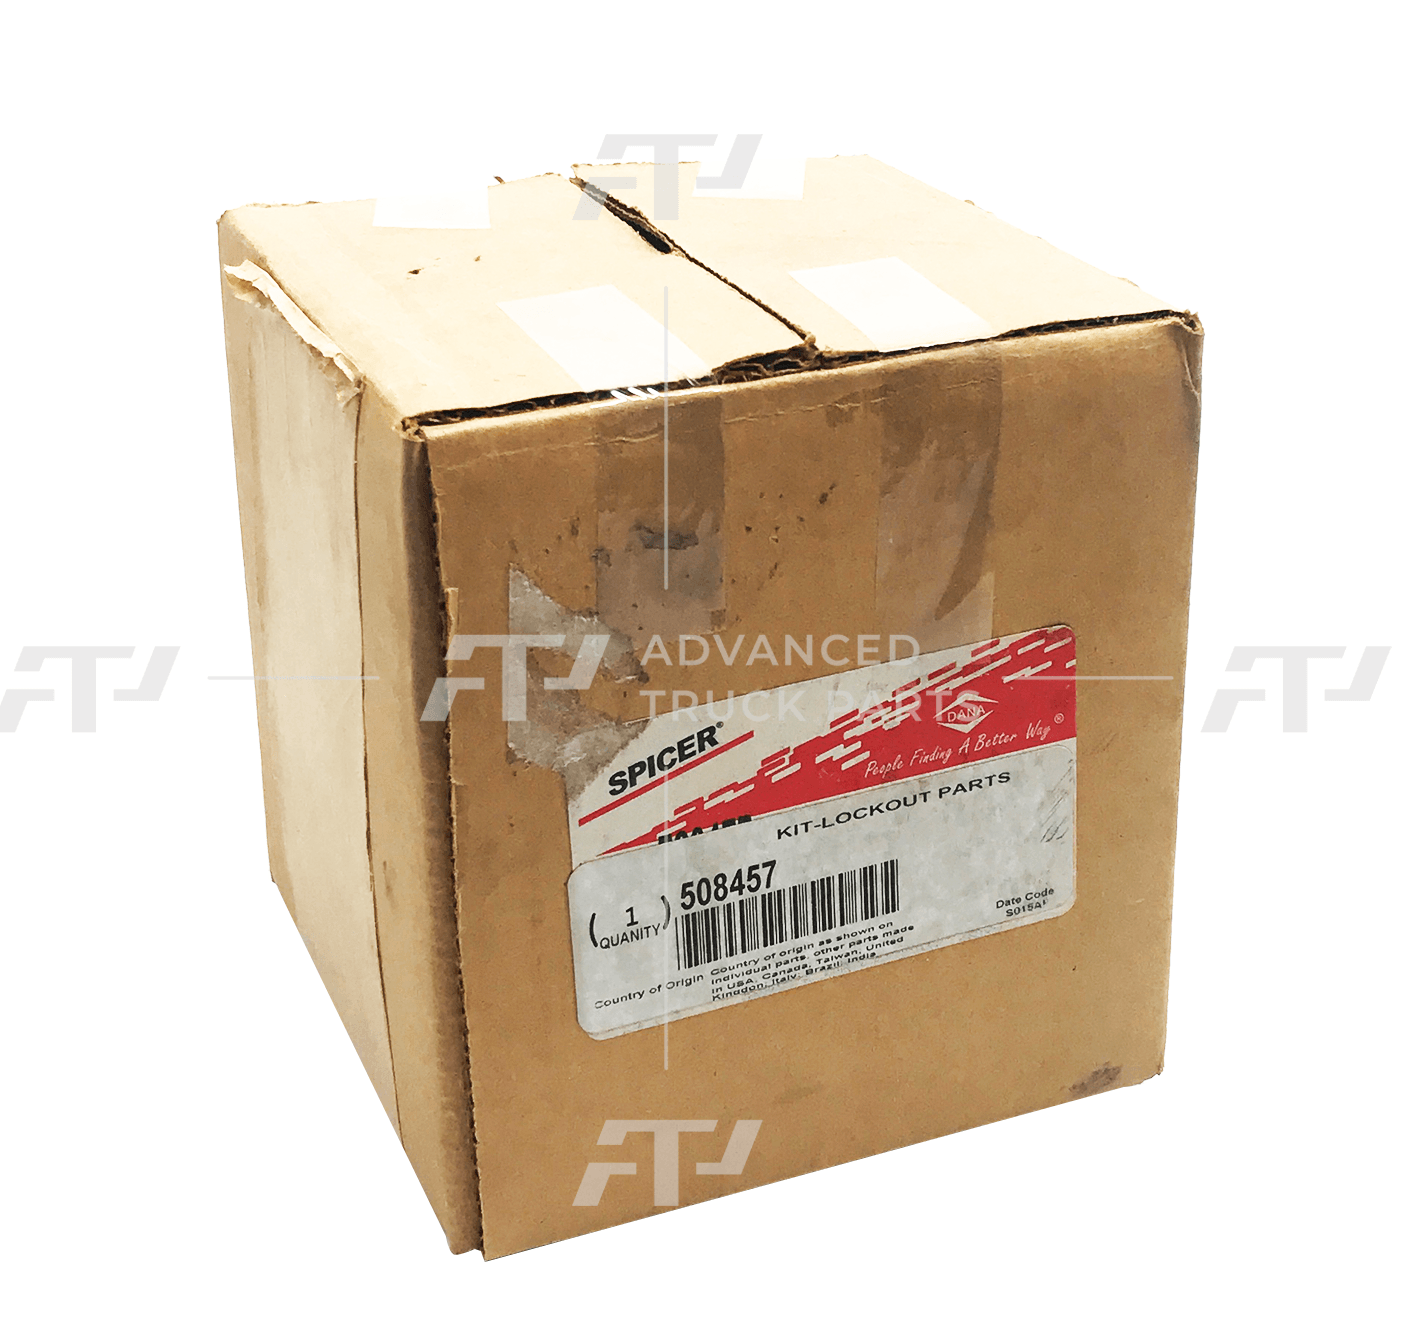 508457 Eaton Spicer Differential Lockout Repair Kit Model 402/461 - ADVANCED TRUCK PARTS